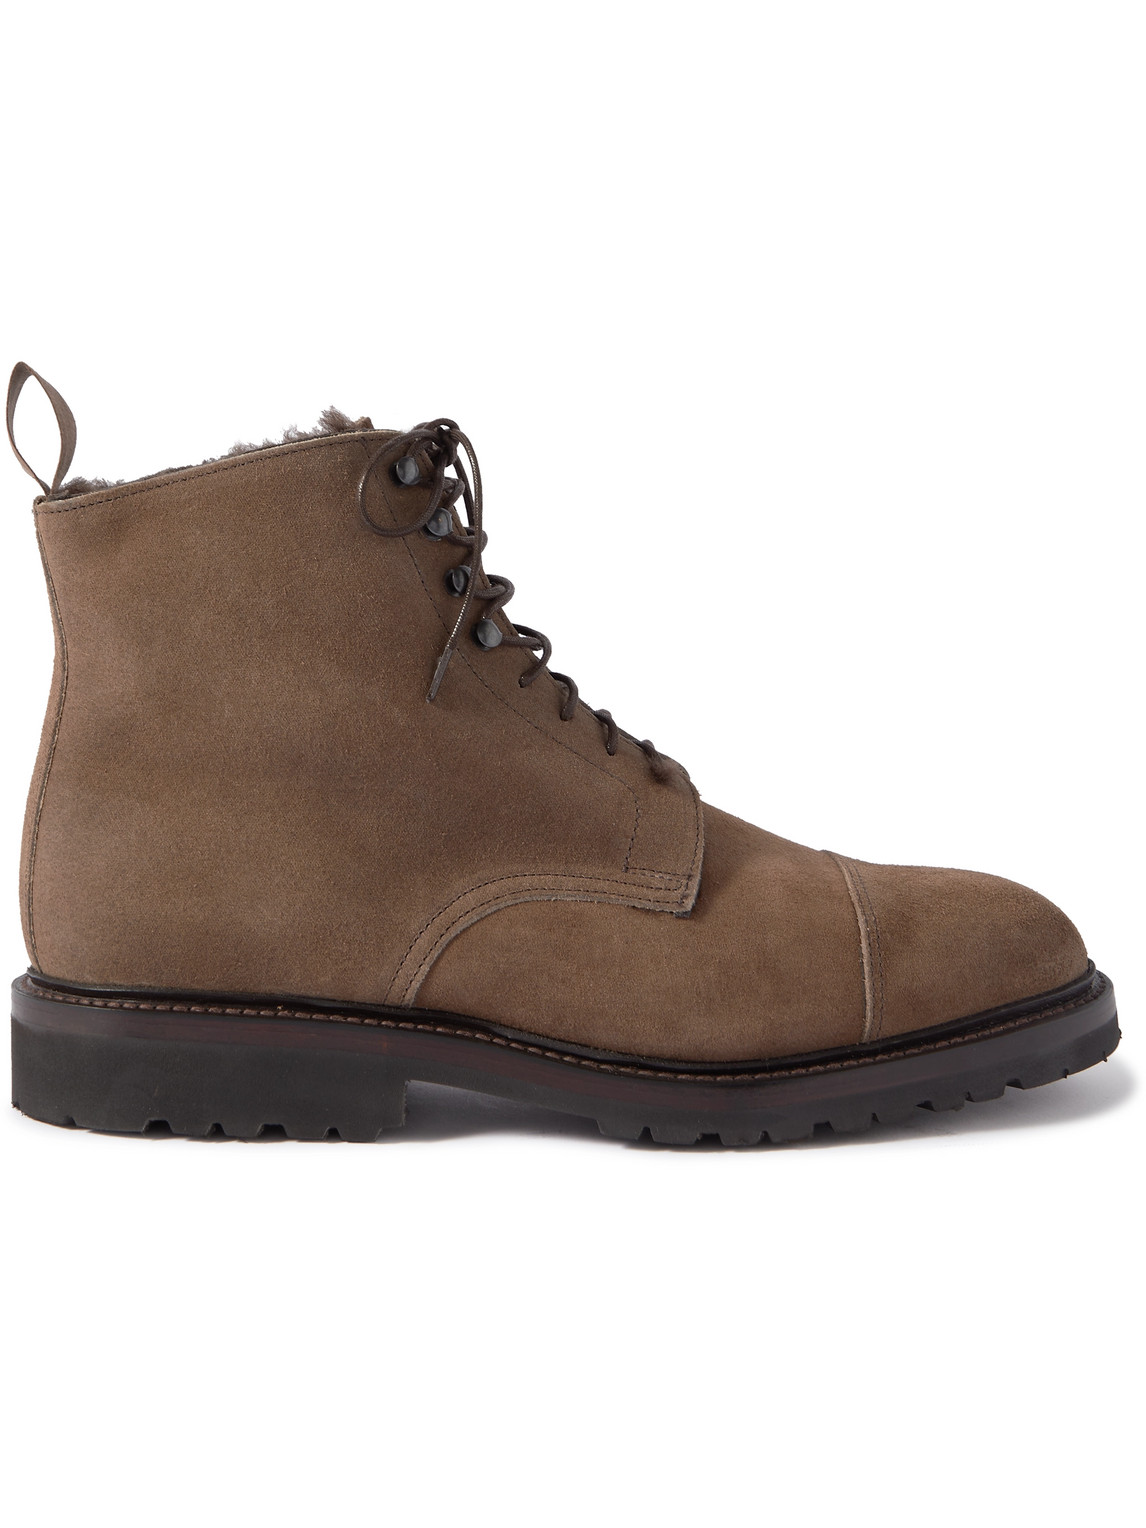 George Cleverley - Taron 2 Shearling-Lined Leather-Trimmed Waxed-Suede Boots - Men - Brown - UK 8 von George Cleverley